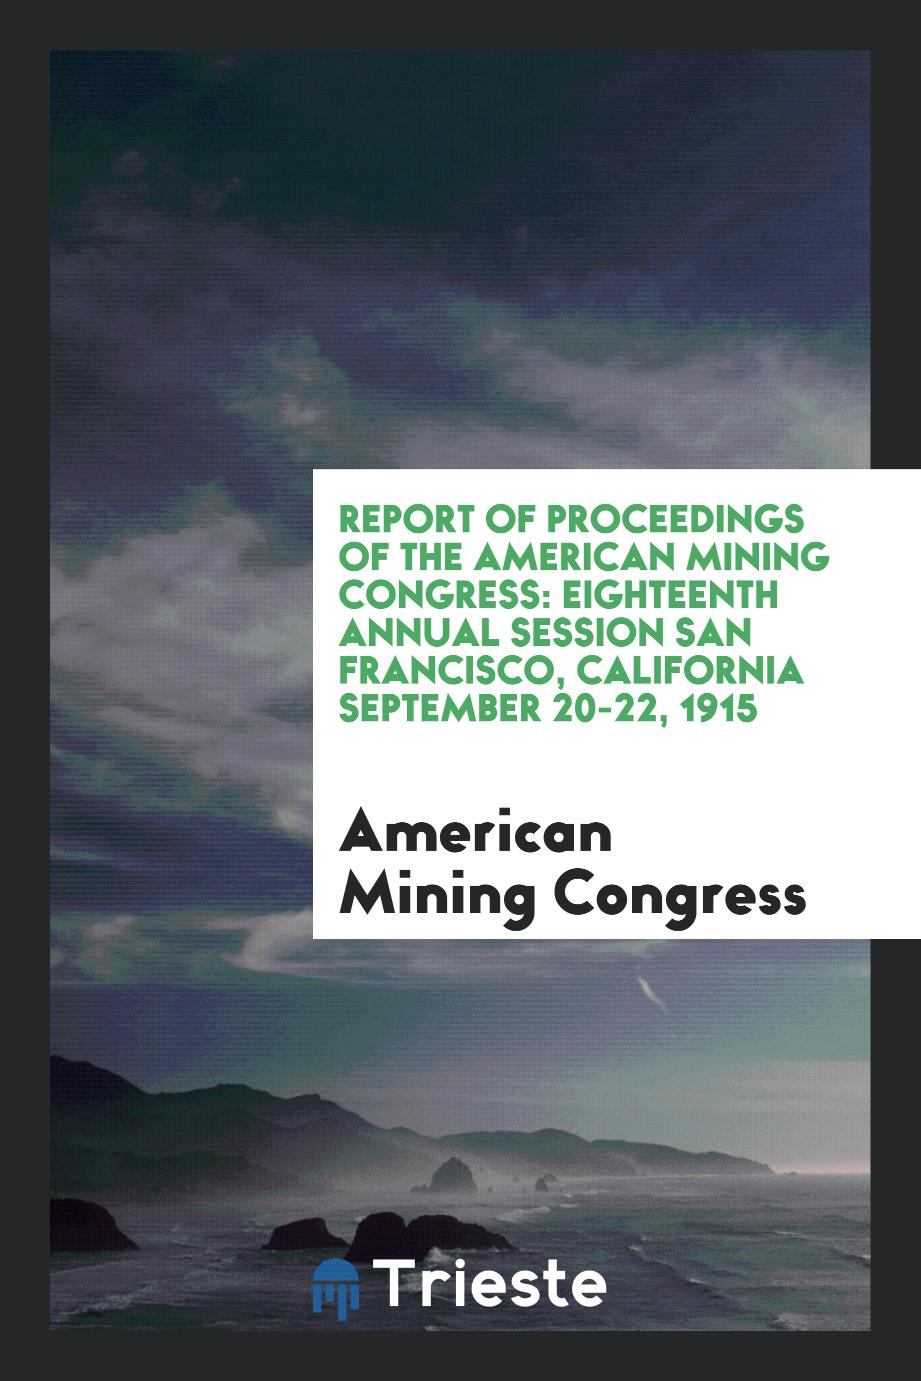 Report of Proceedings of the American Mining Congress: Eighteenth Annual Session San Francisco, California September 20-22, 1915